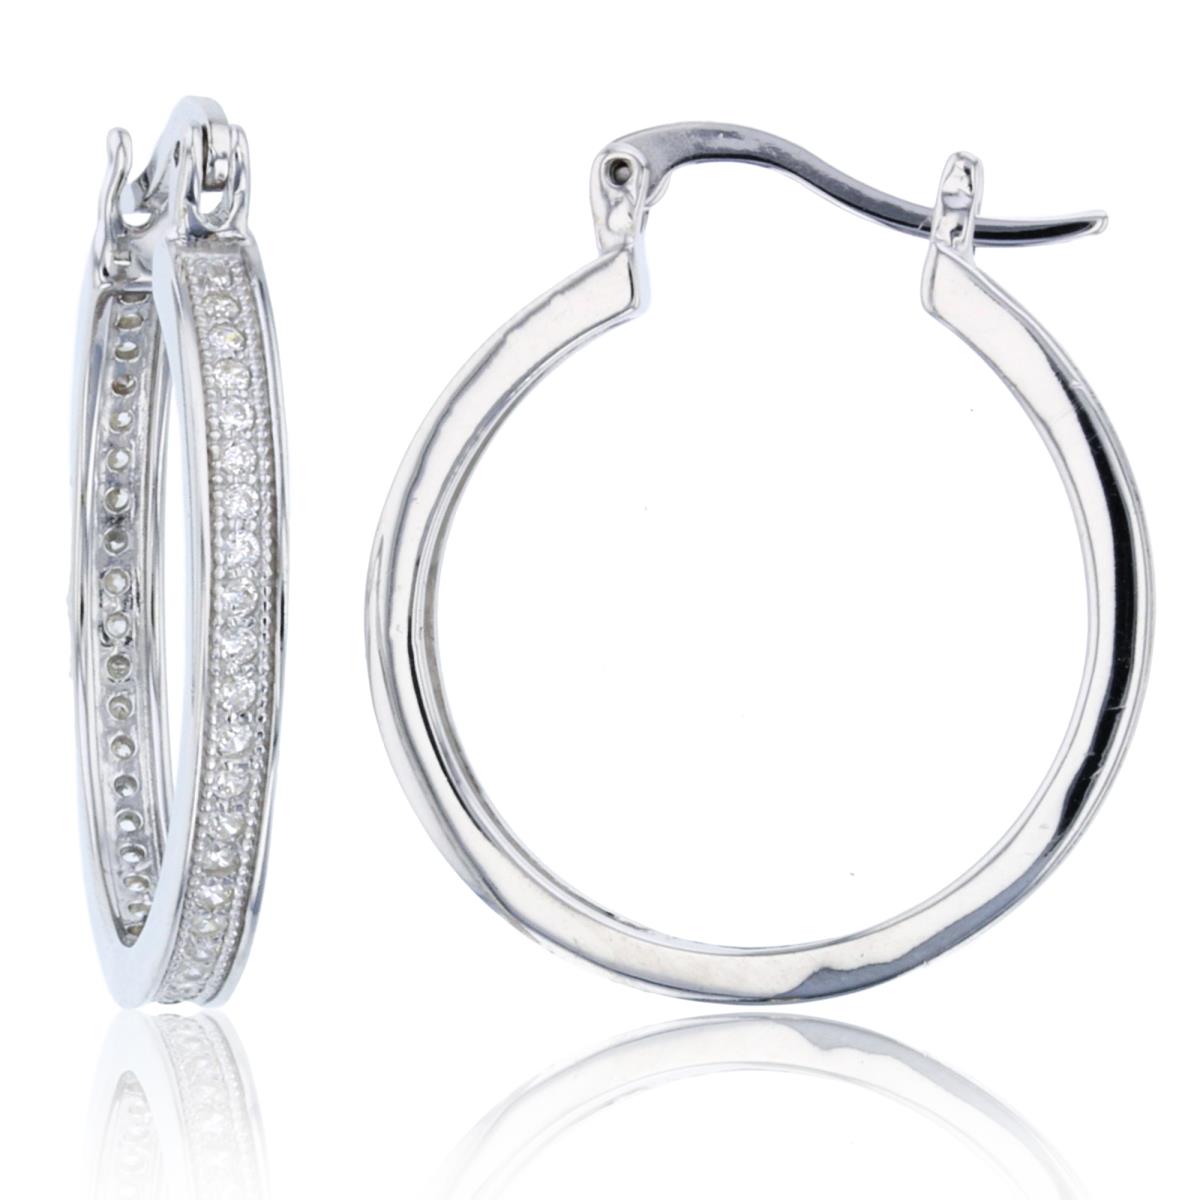 Sterling Silver Micropave Hoops 23x3mm Earring